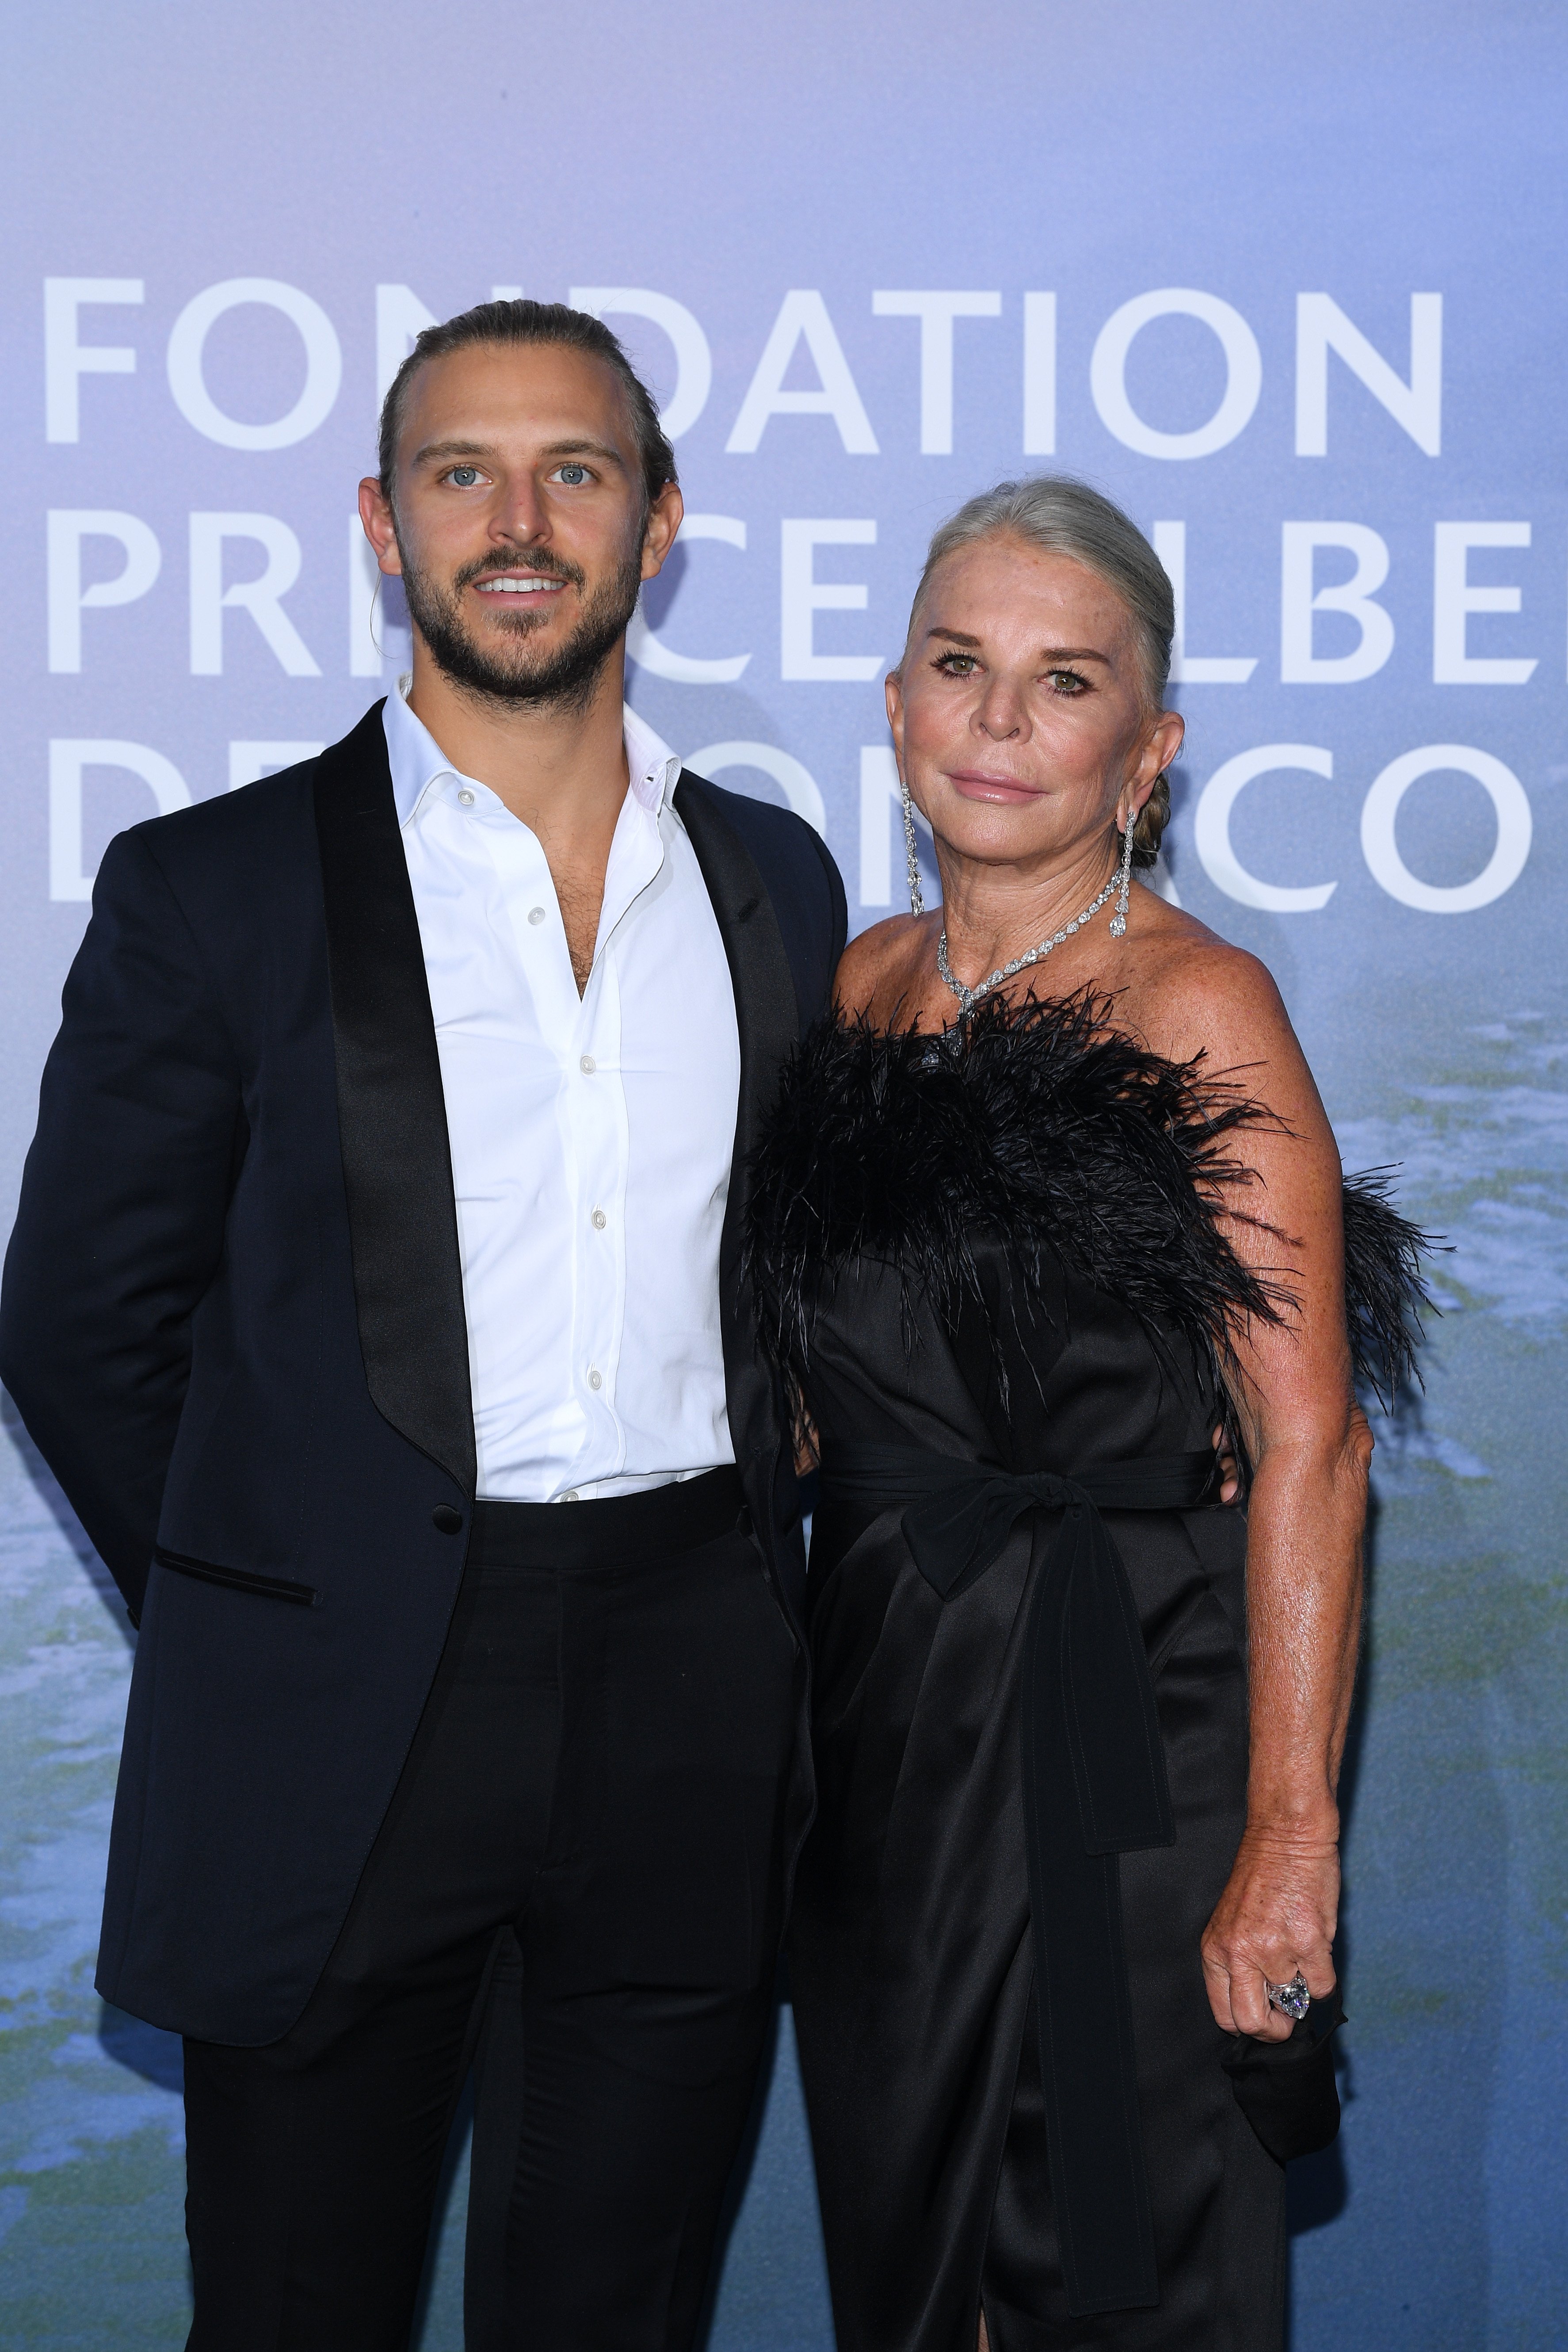 Brandon Green and Cristina Green at the Monte-Carlo Gala For Planetary Health on September 24, 2020 | Source: Getty Images